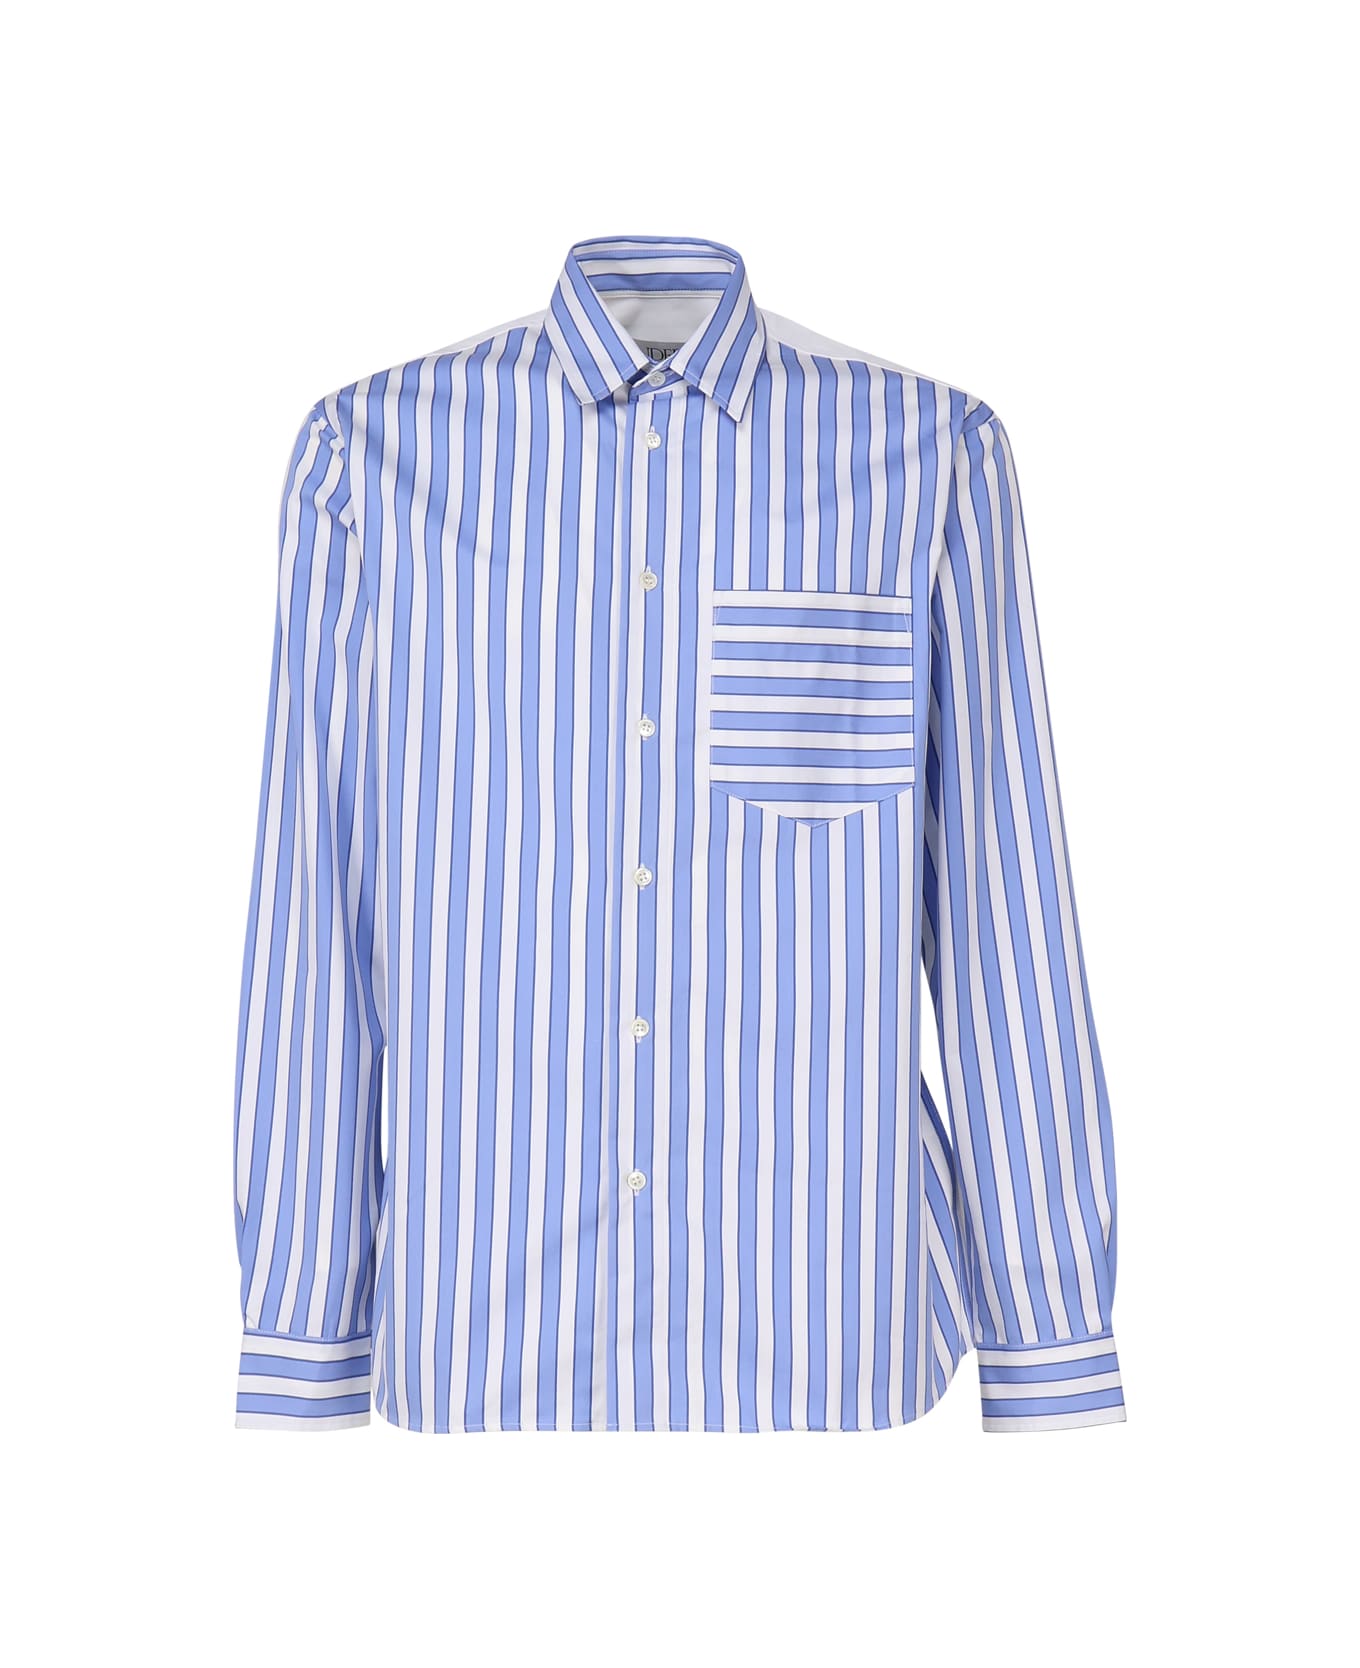 J.W. Anderson Striped Shirt With Insert Design - Light blue/white シャツ